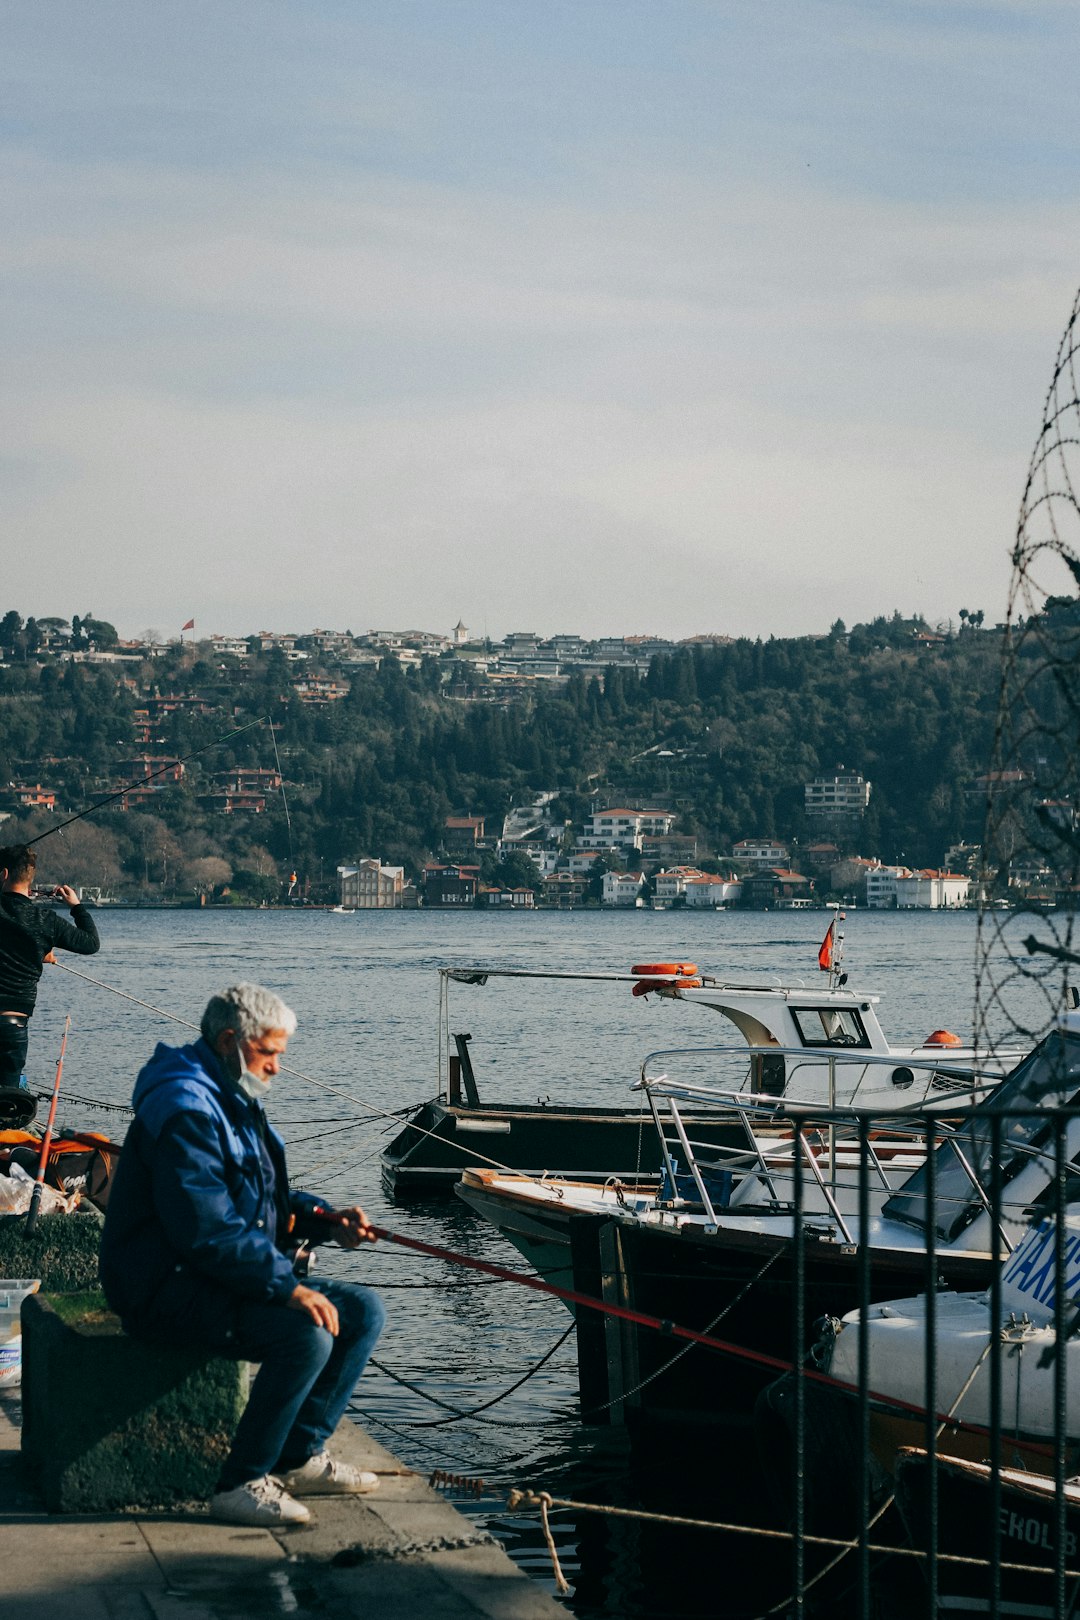 man in blue jacket sitting on boat during daytime